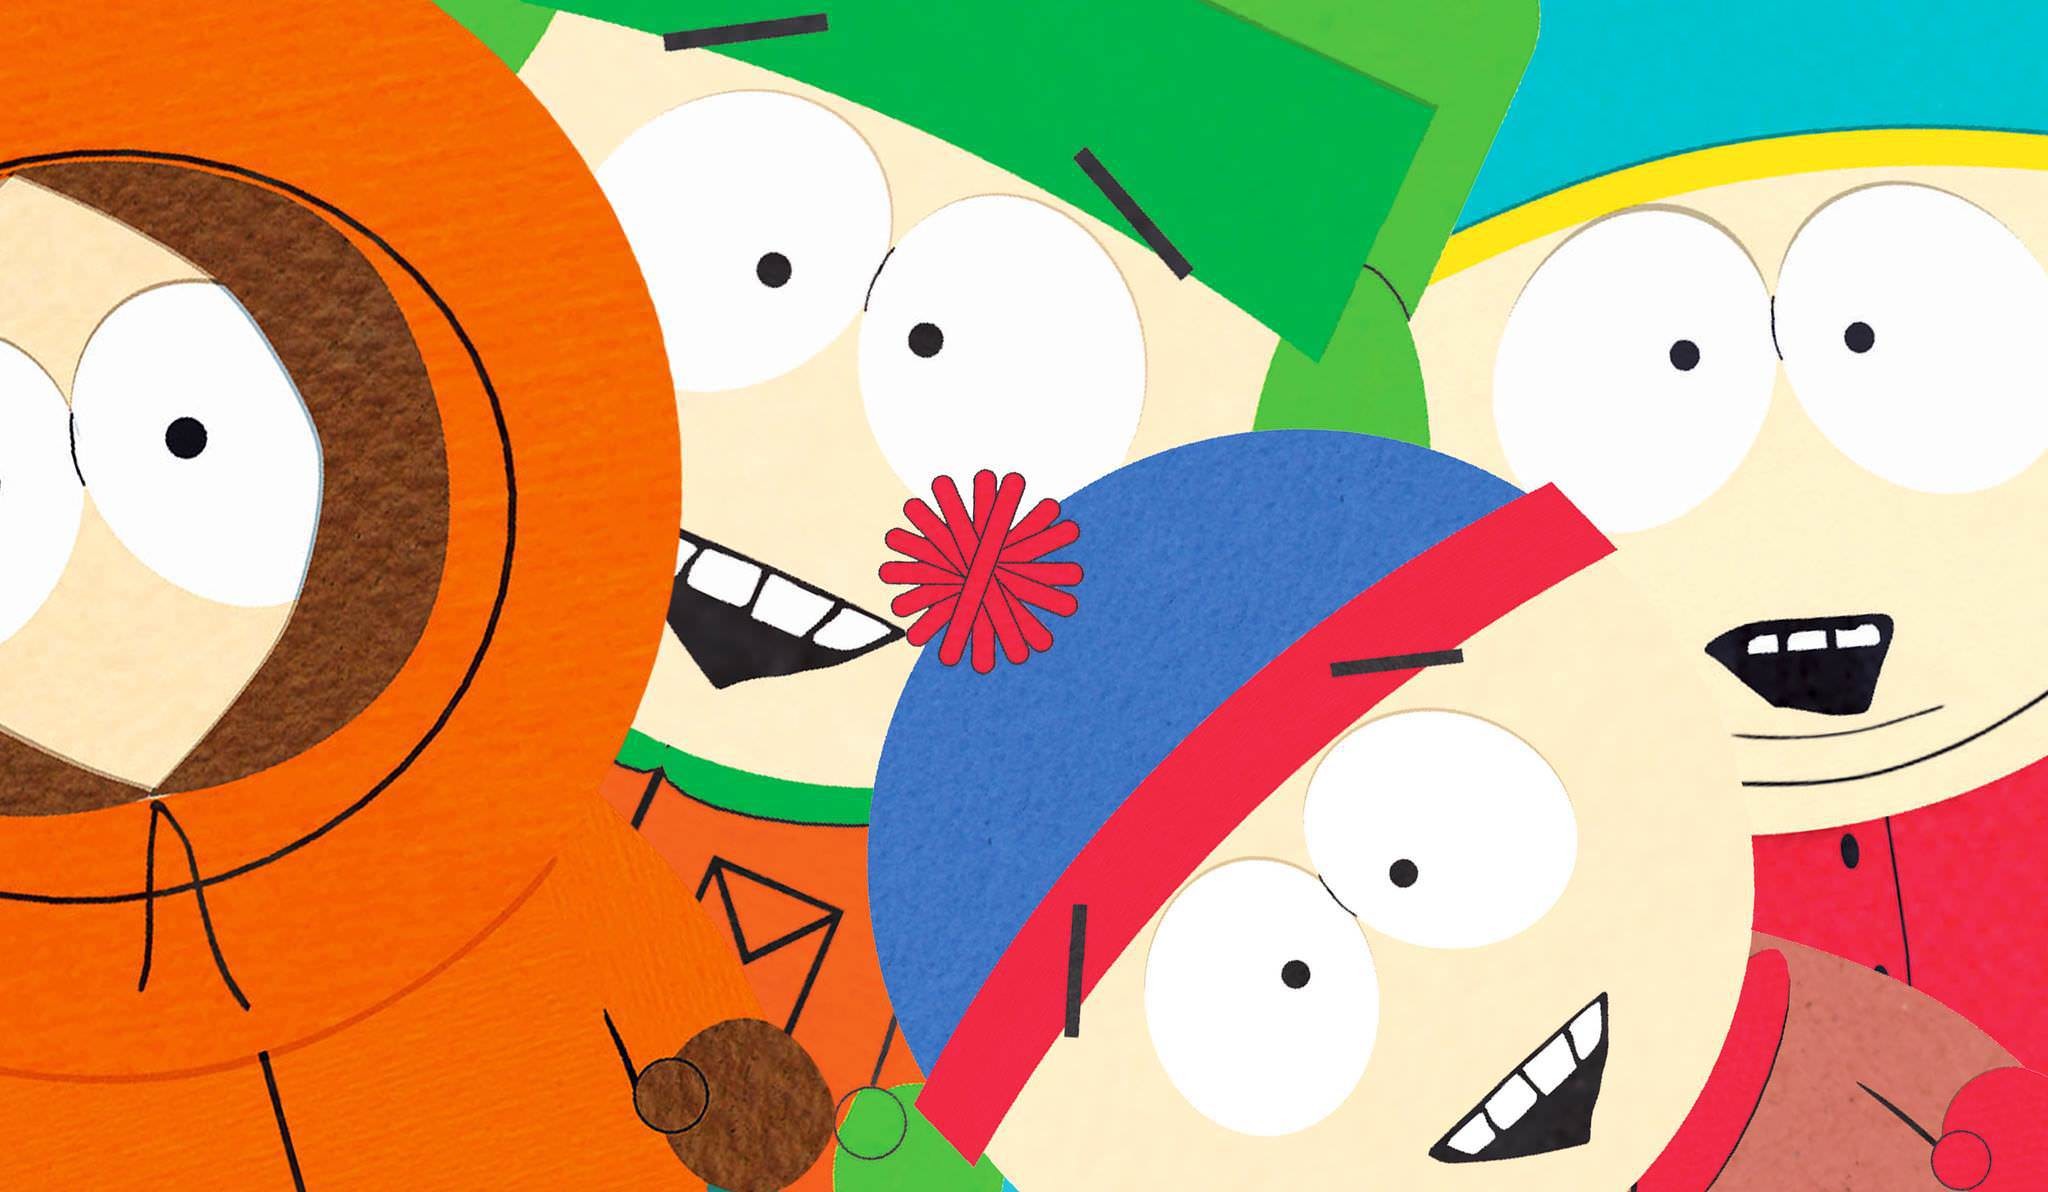 2048x1192 South Park Wallpapers High Quality Download Free | HD Wallpapers |  Pinterest | South park, Hd wallpaper and Wallpaper